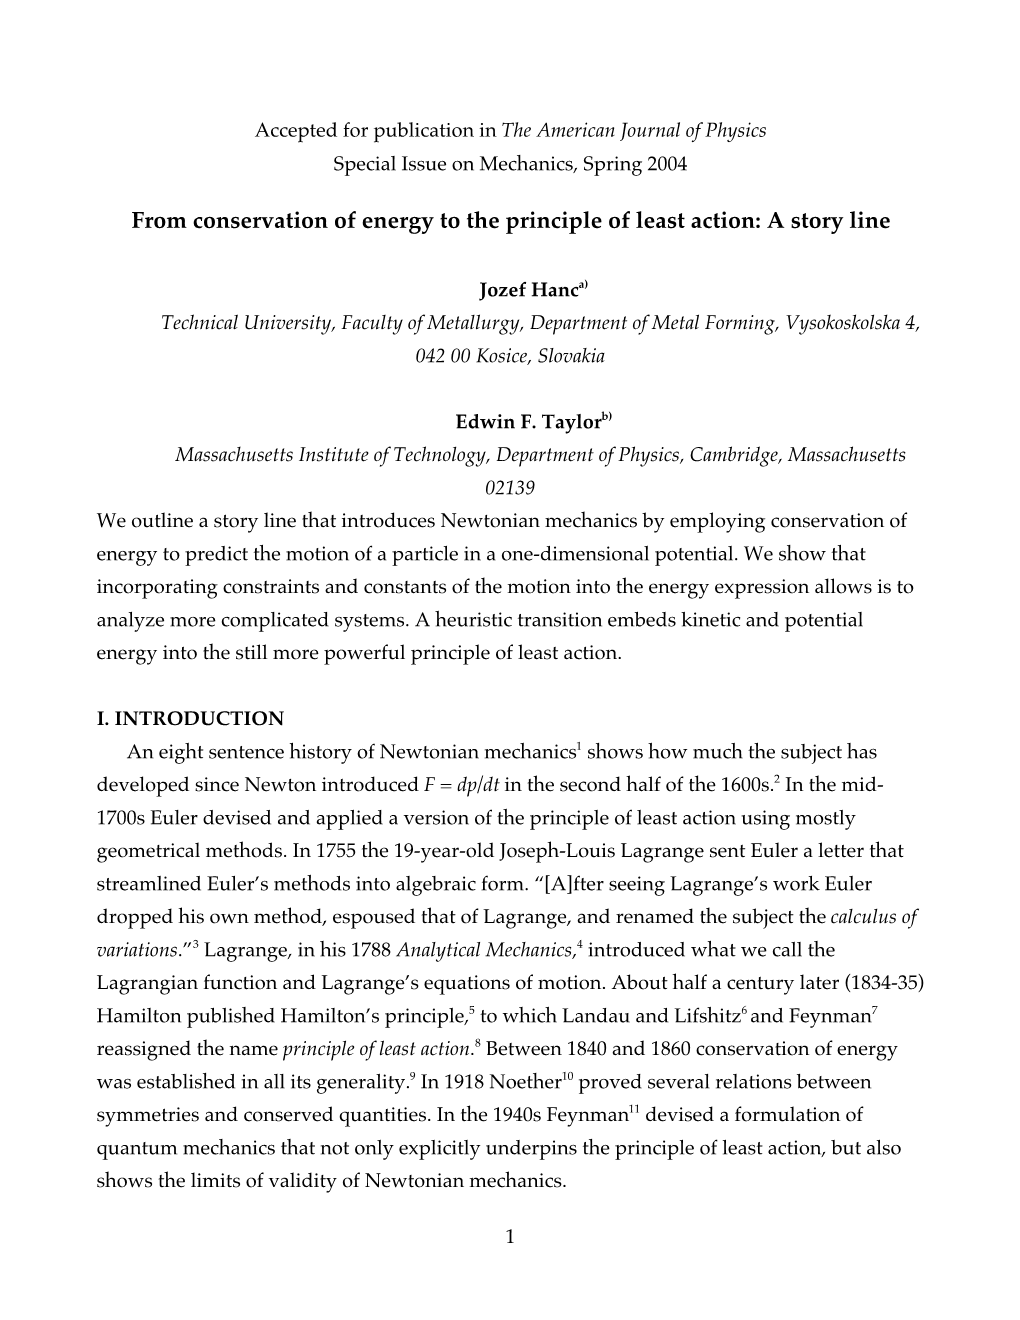 From Conservation of Energy to the Principle of Least Action: a Story Line